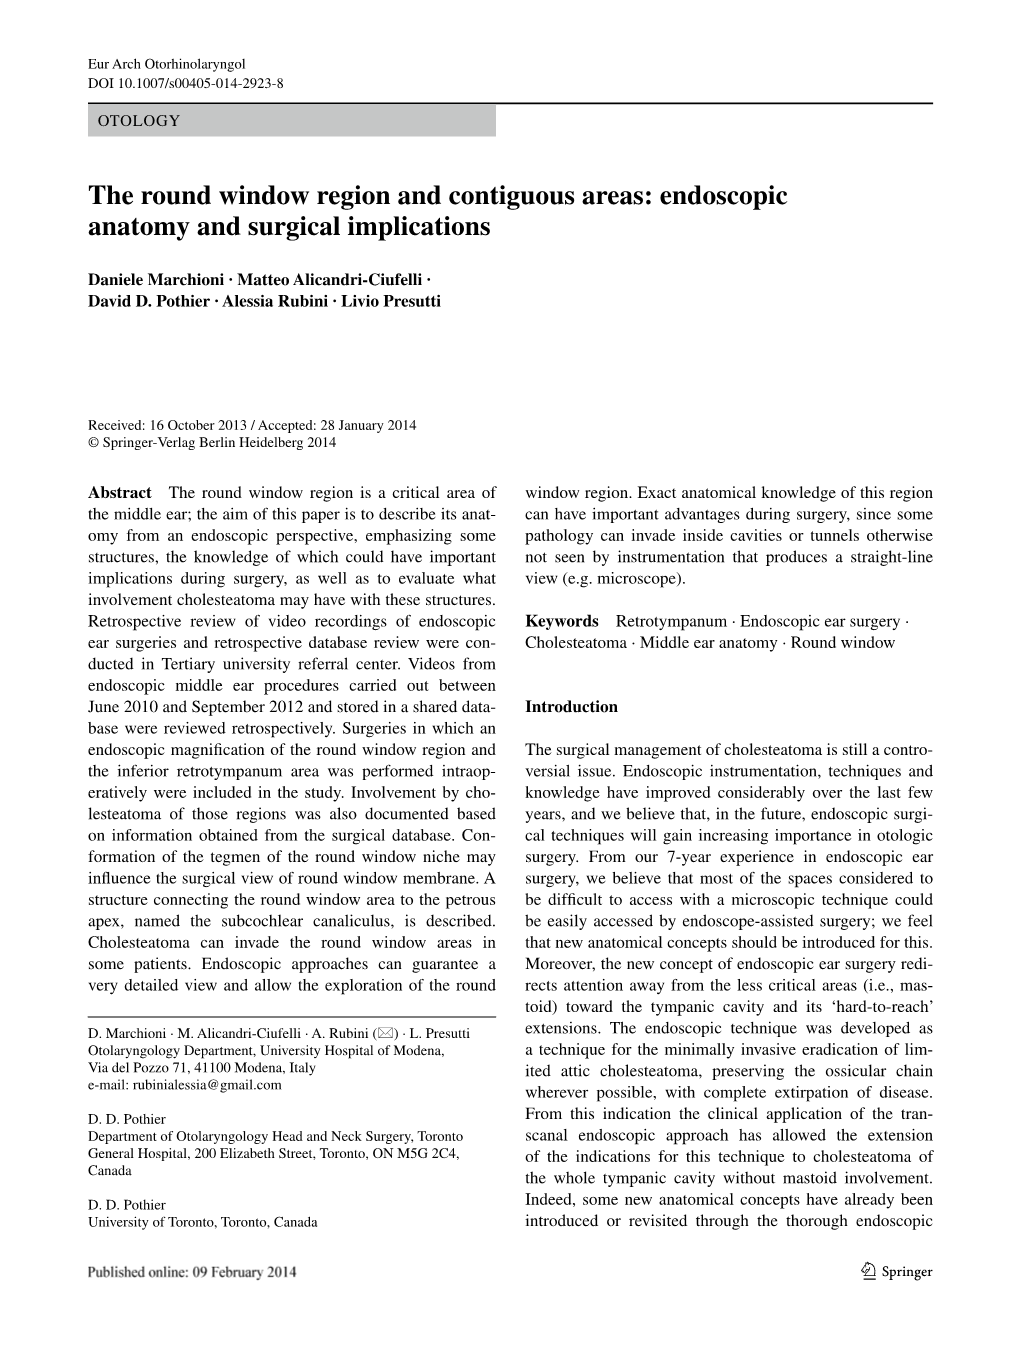 The Round Window Region and Contiguous Areas: Endoscopic Anatomy and Surgical Implications